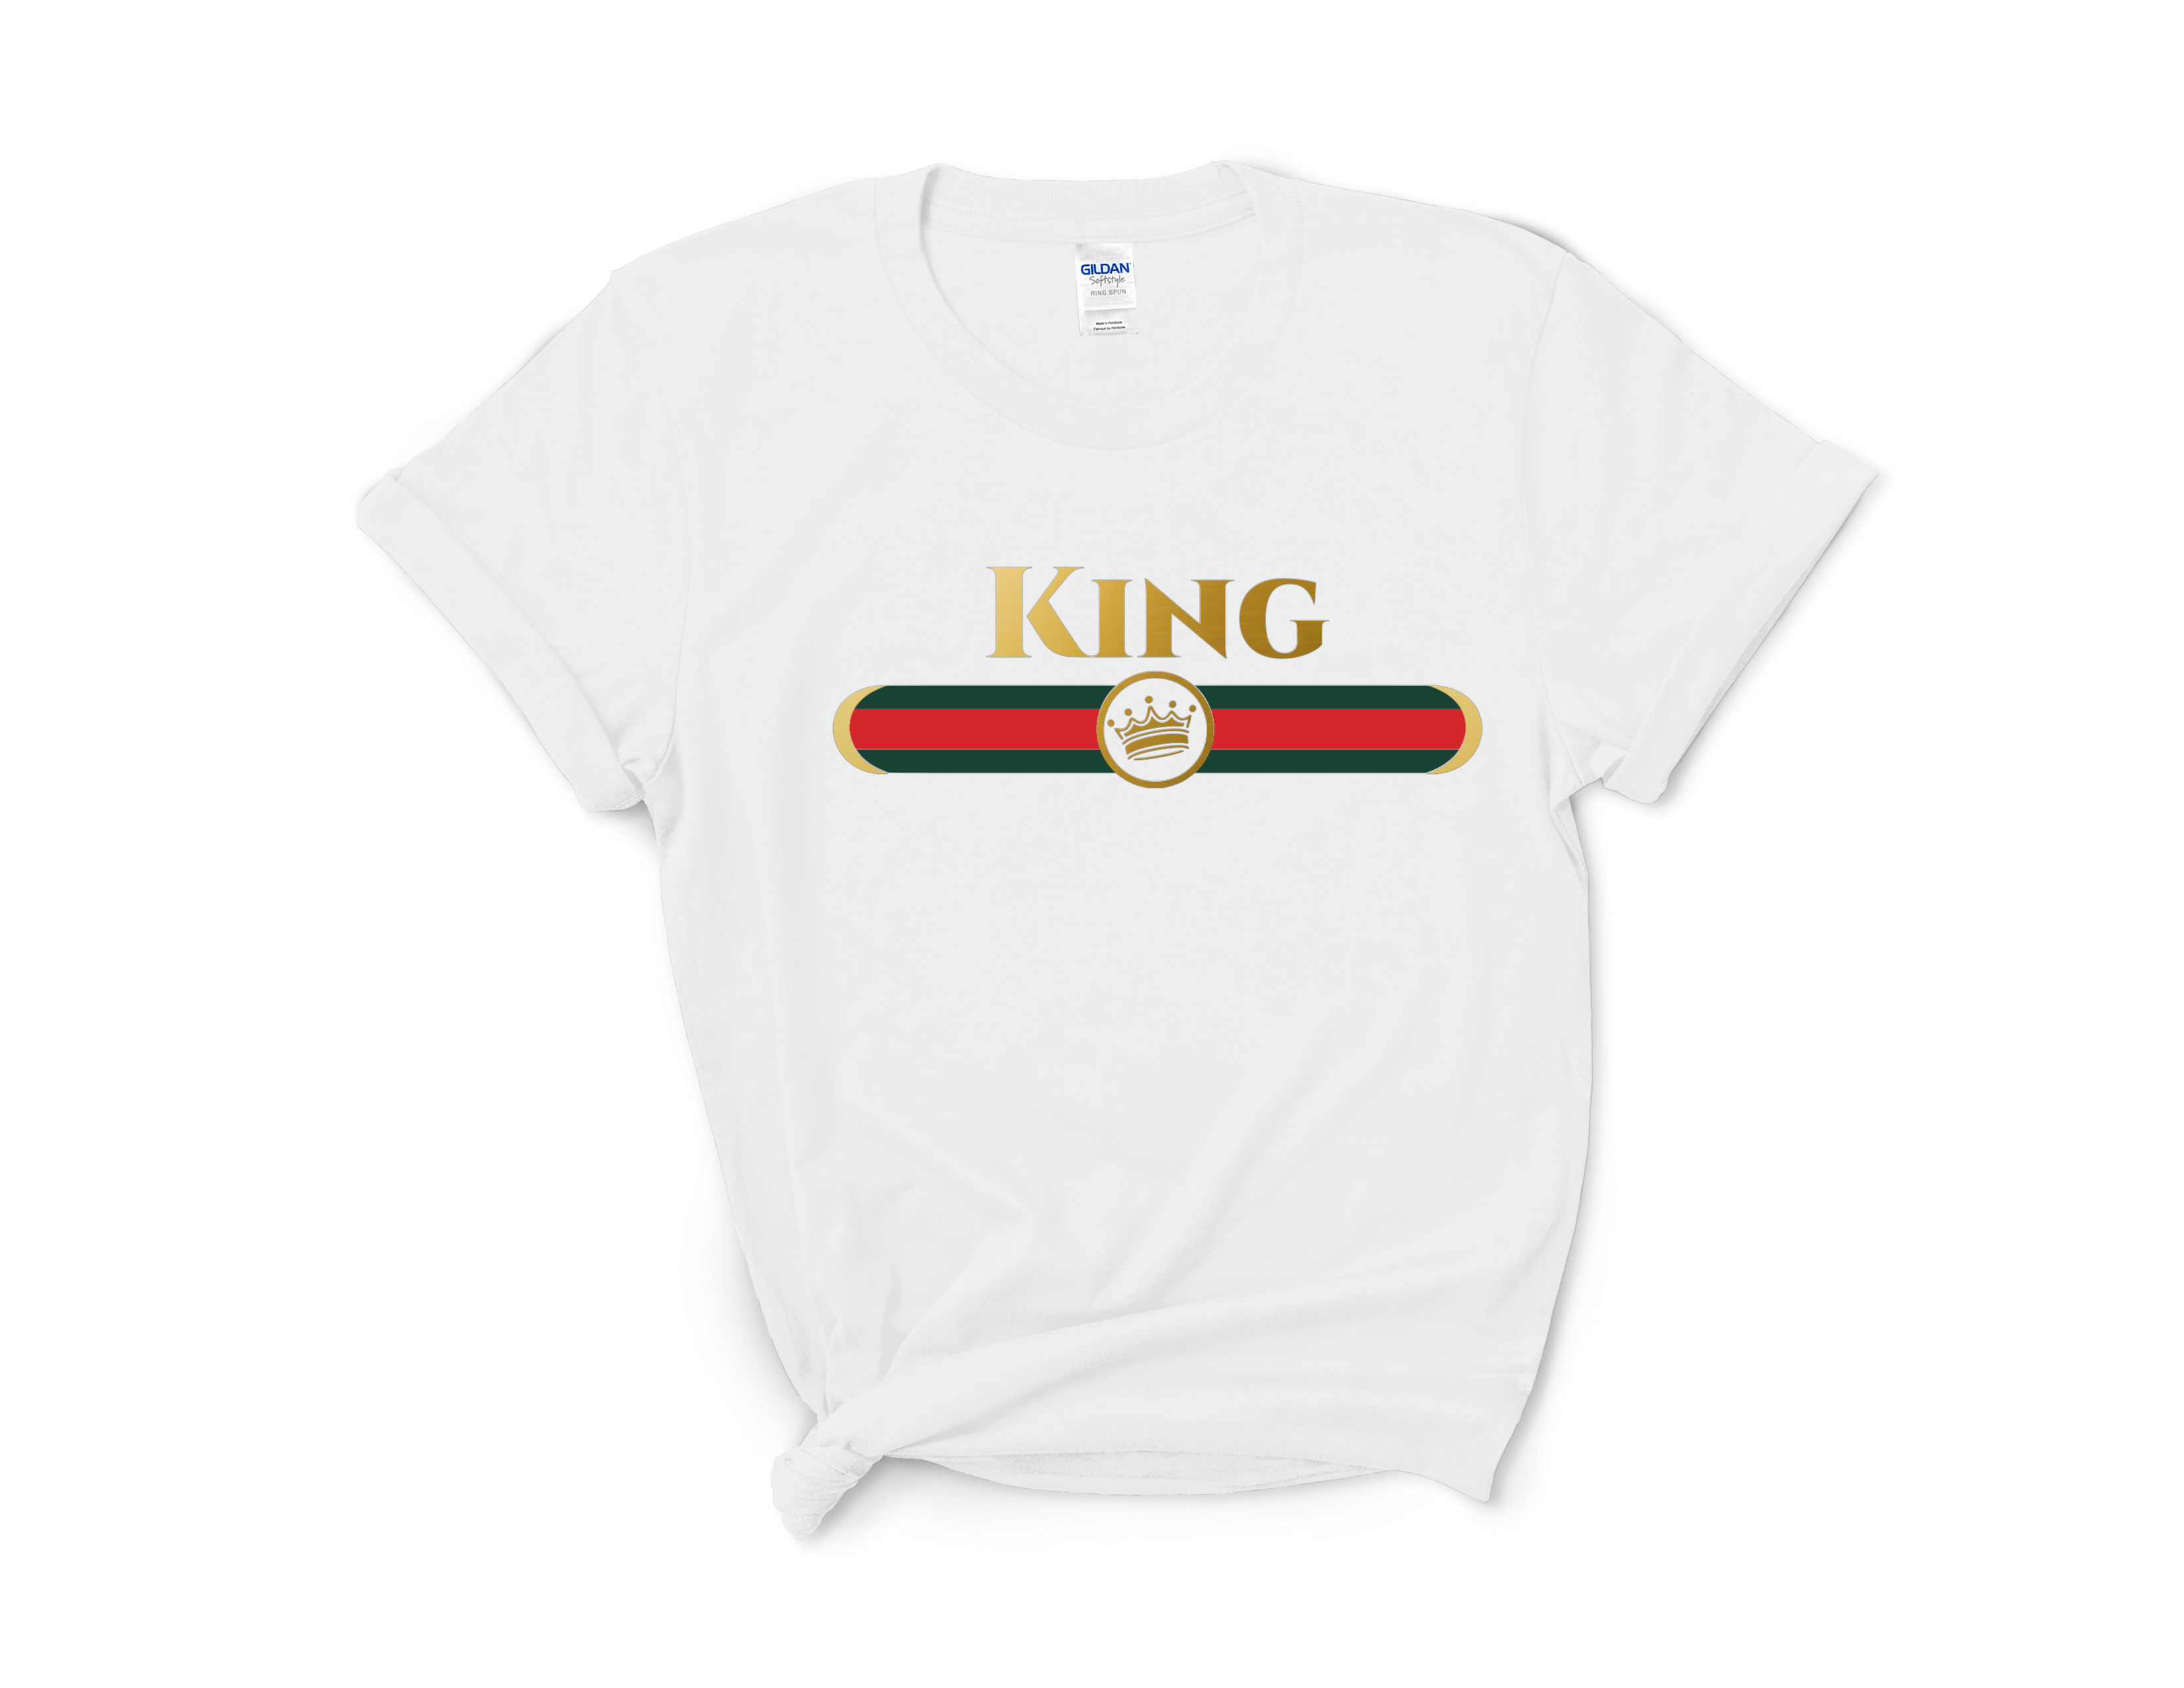 TRUST THE KING / A Christian Clothing Apparel Brand